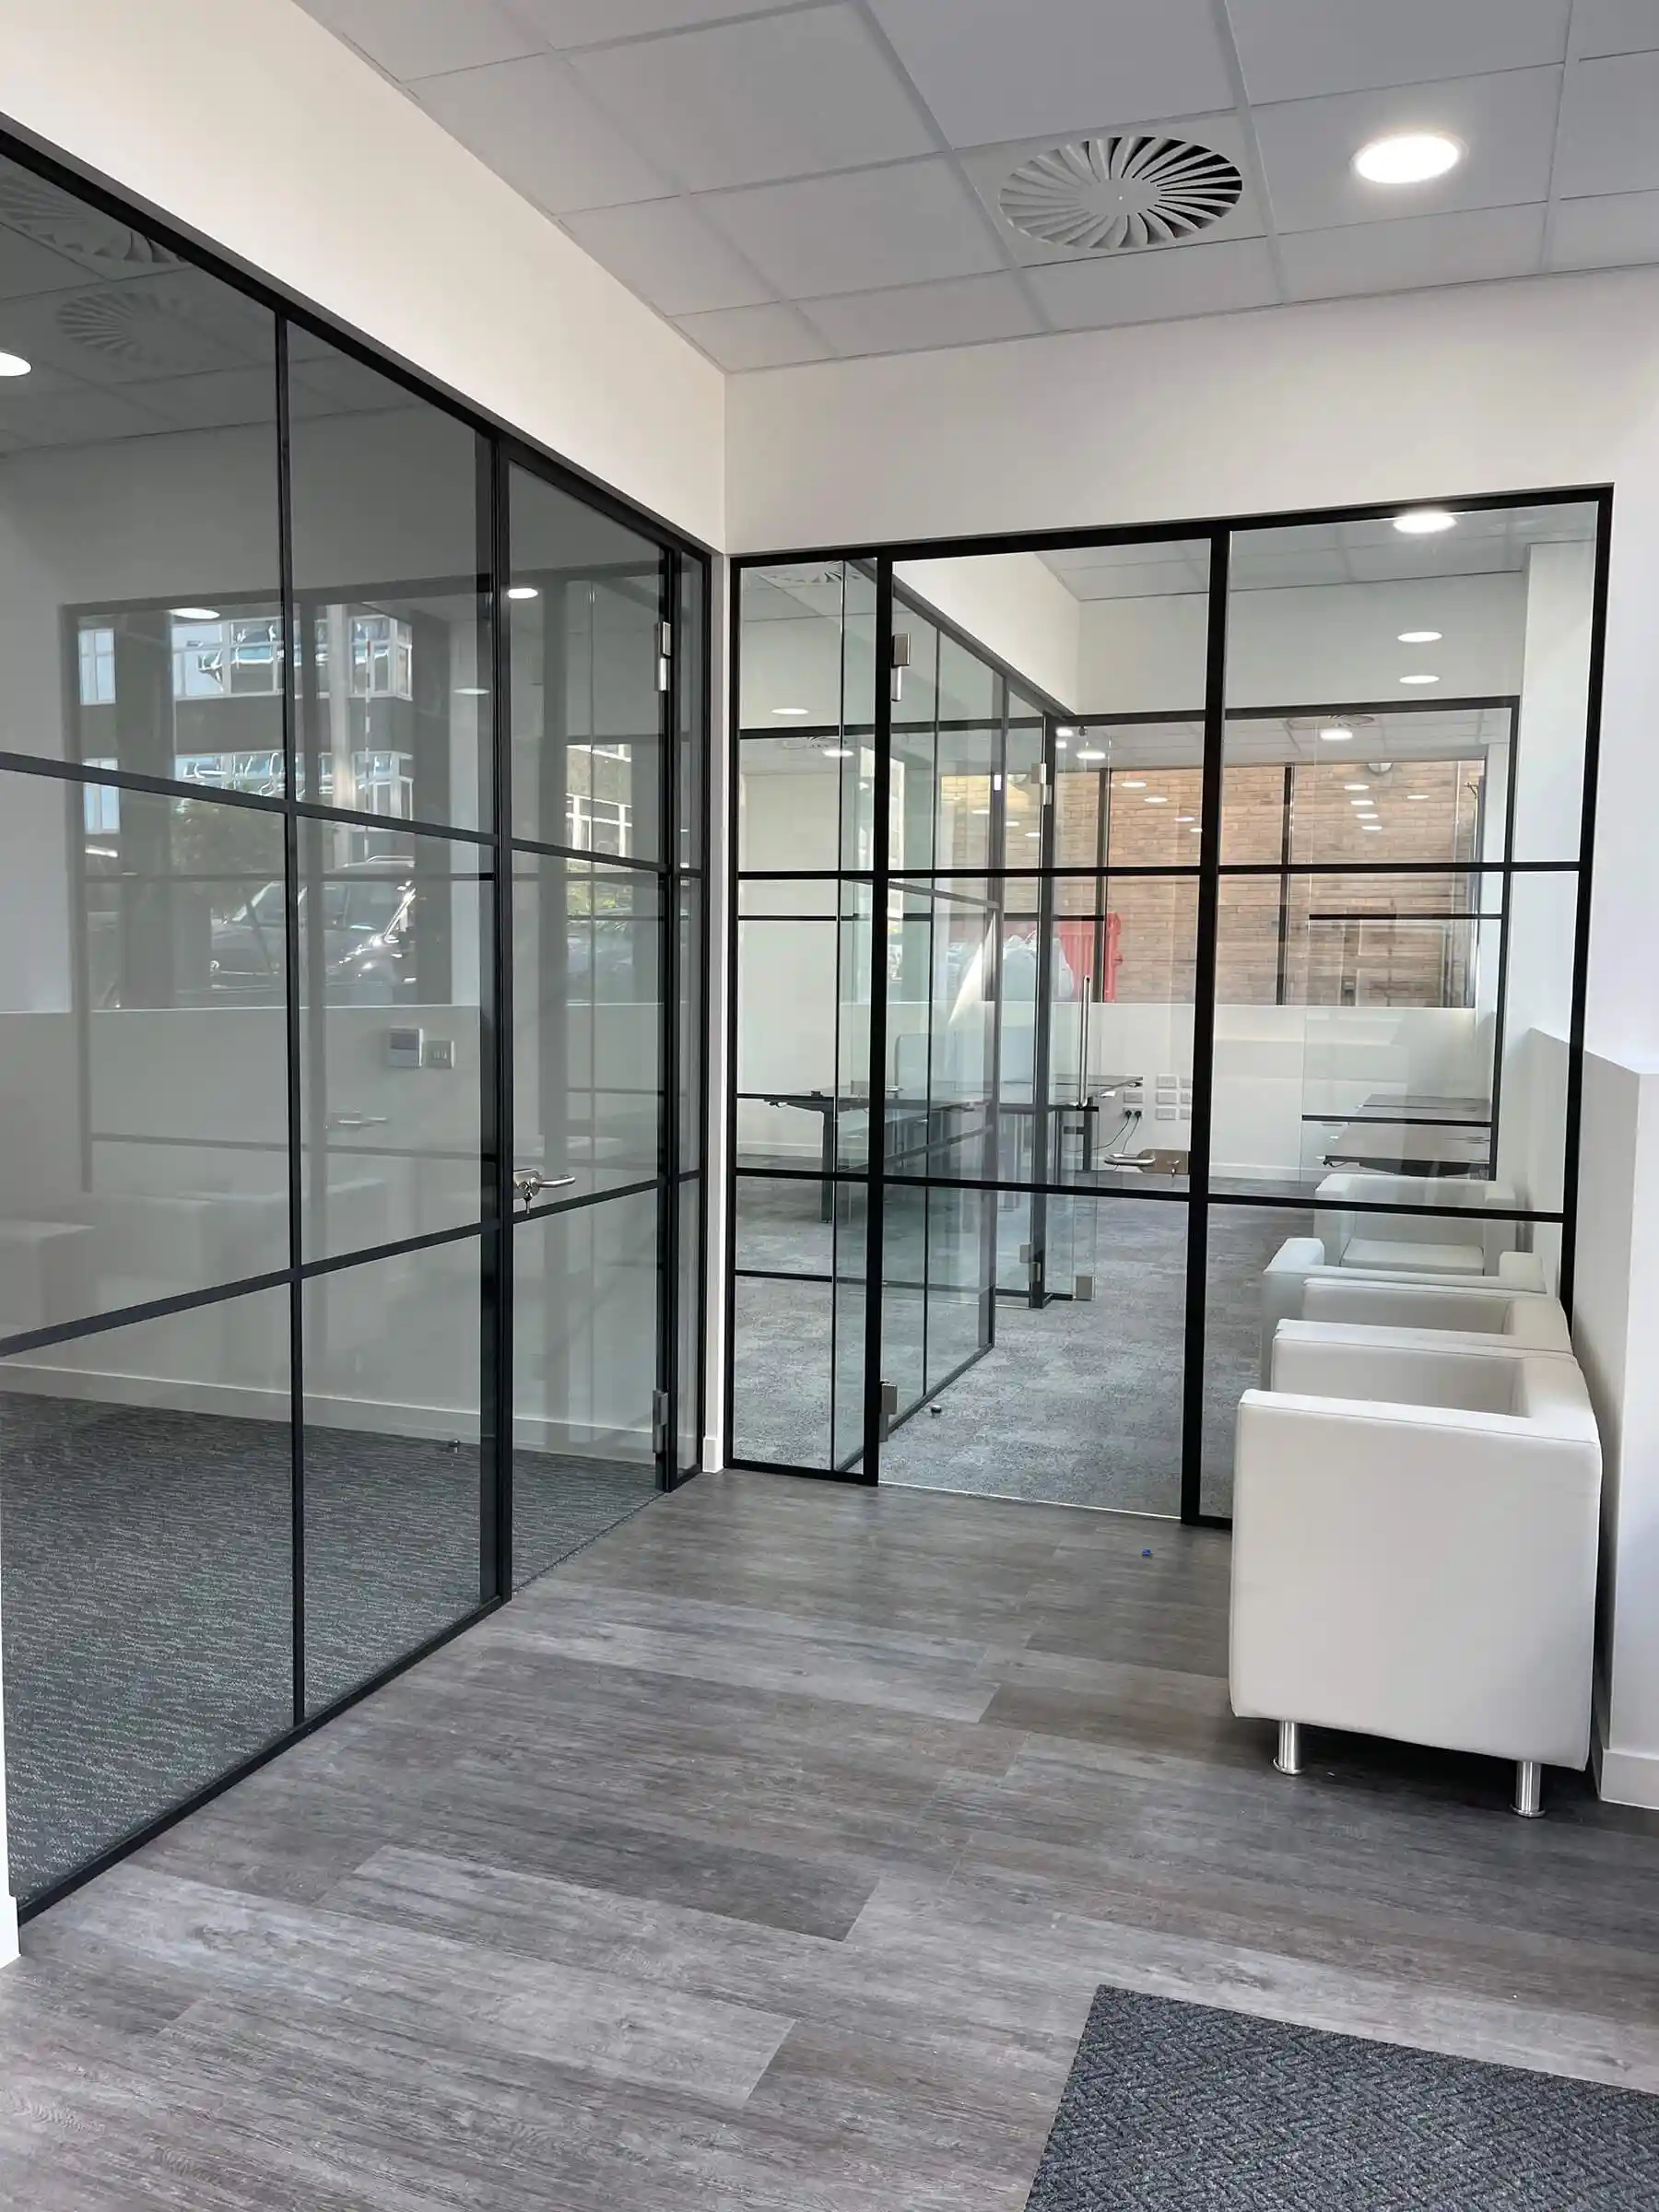 Breakout area with black framed glass partitions_